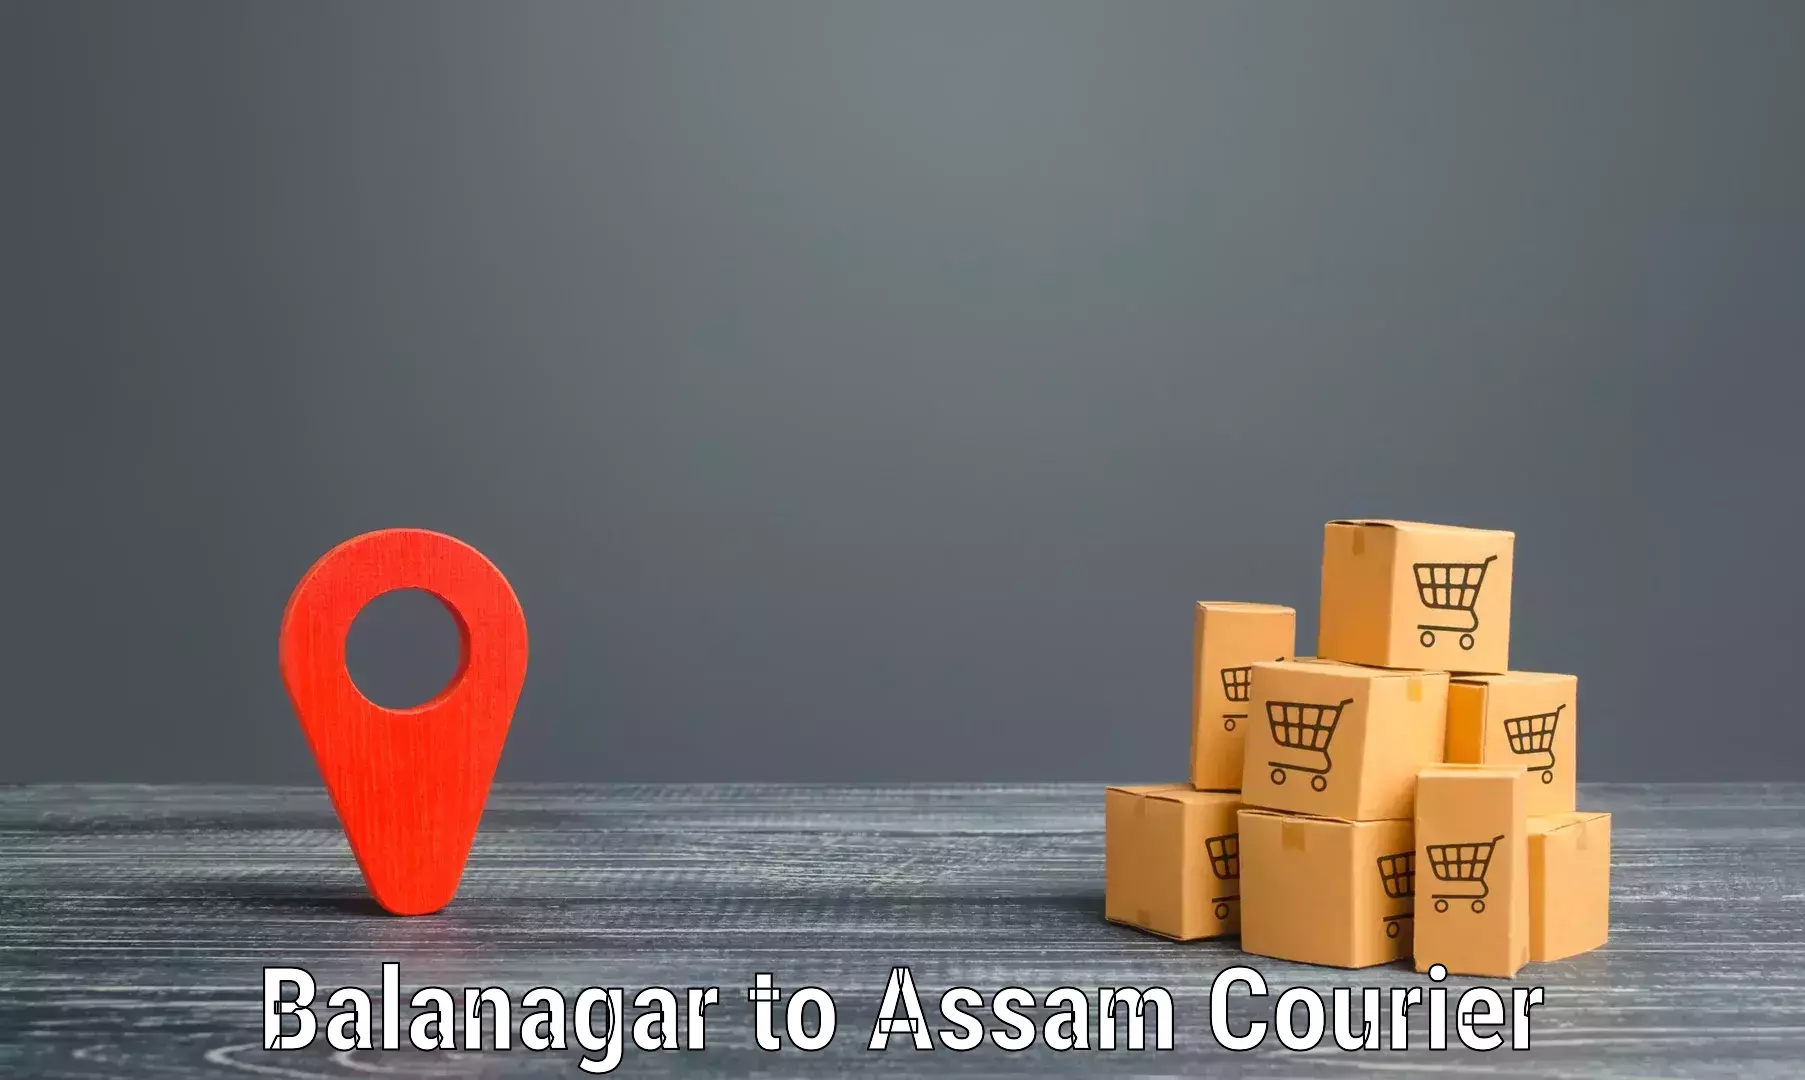 Fast delivery service in Balanagar to Dhemaji